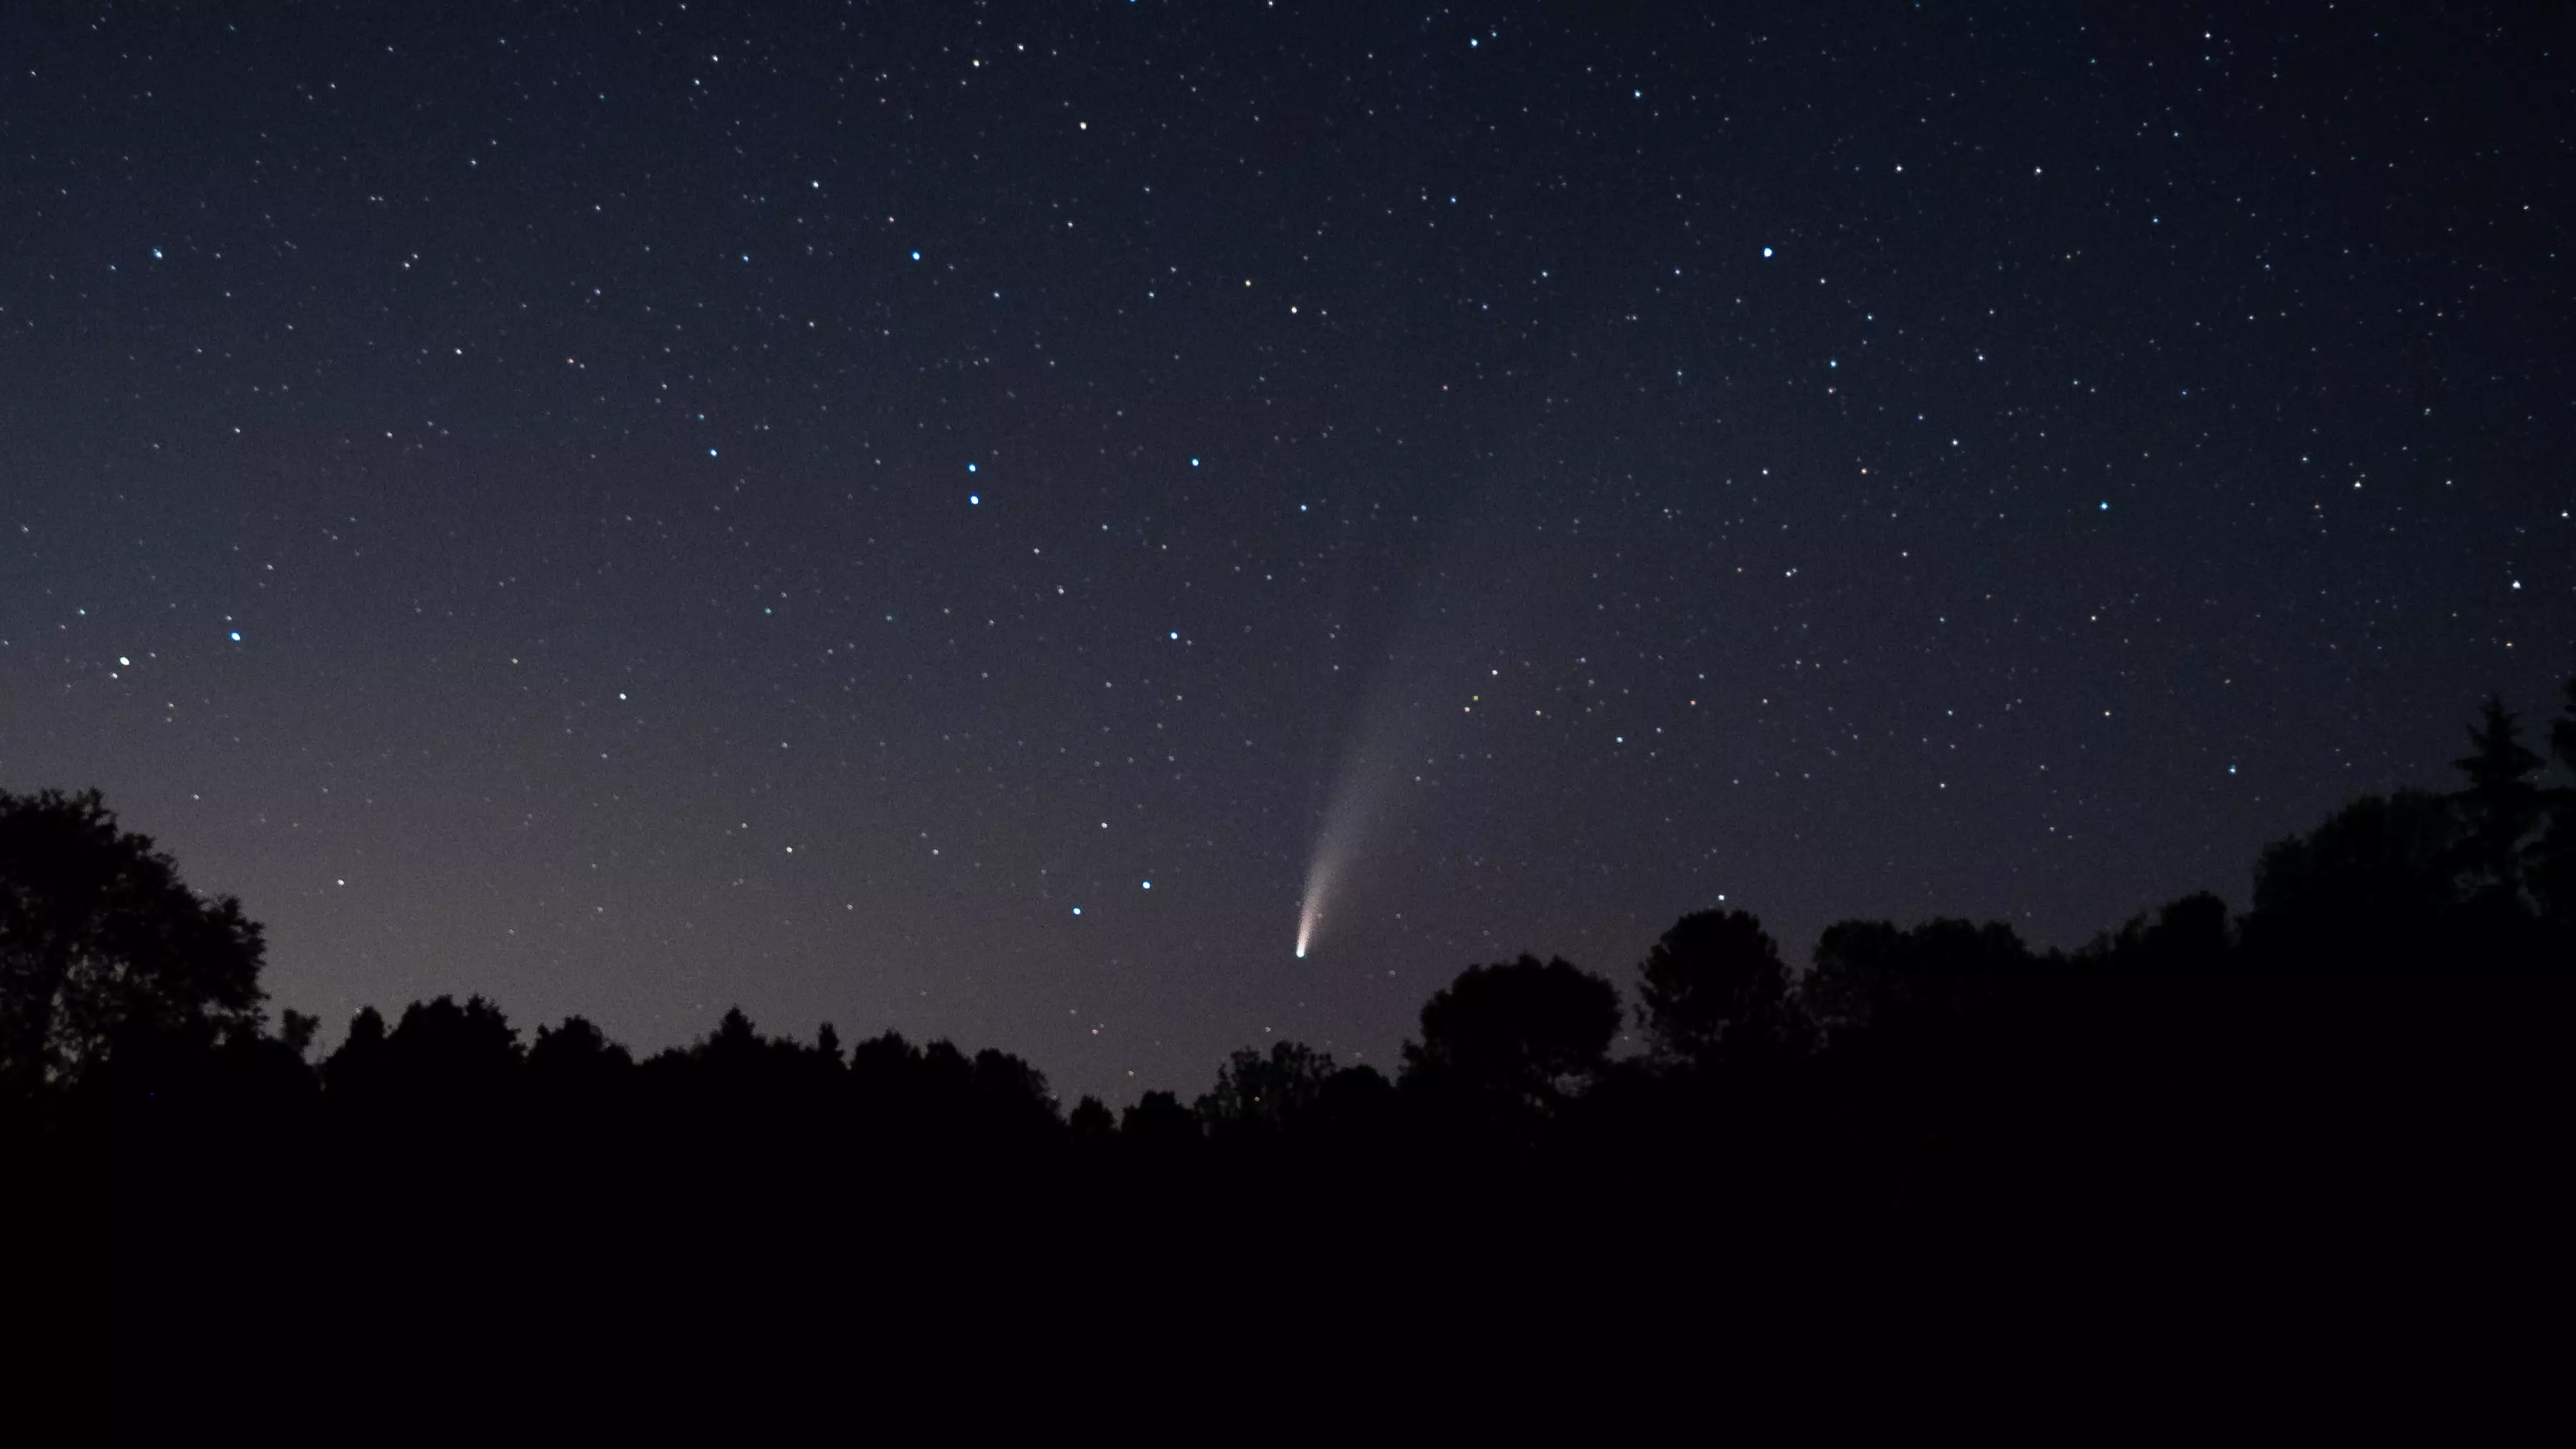 Couple Get Engaged Under Rare Comet That Is Only Visible Every 6,800 Years